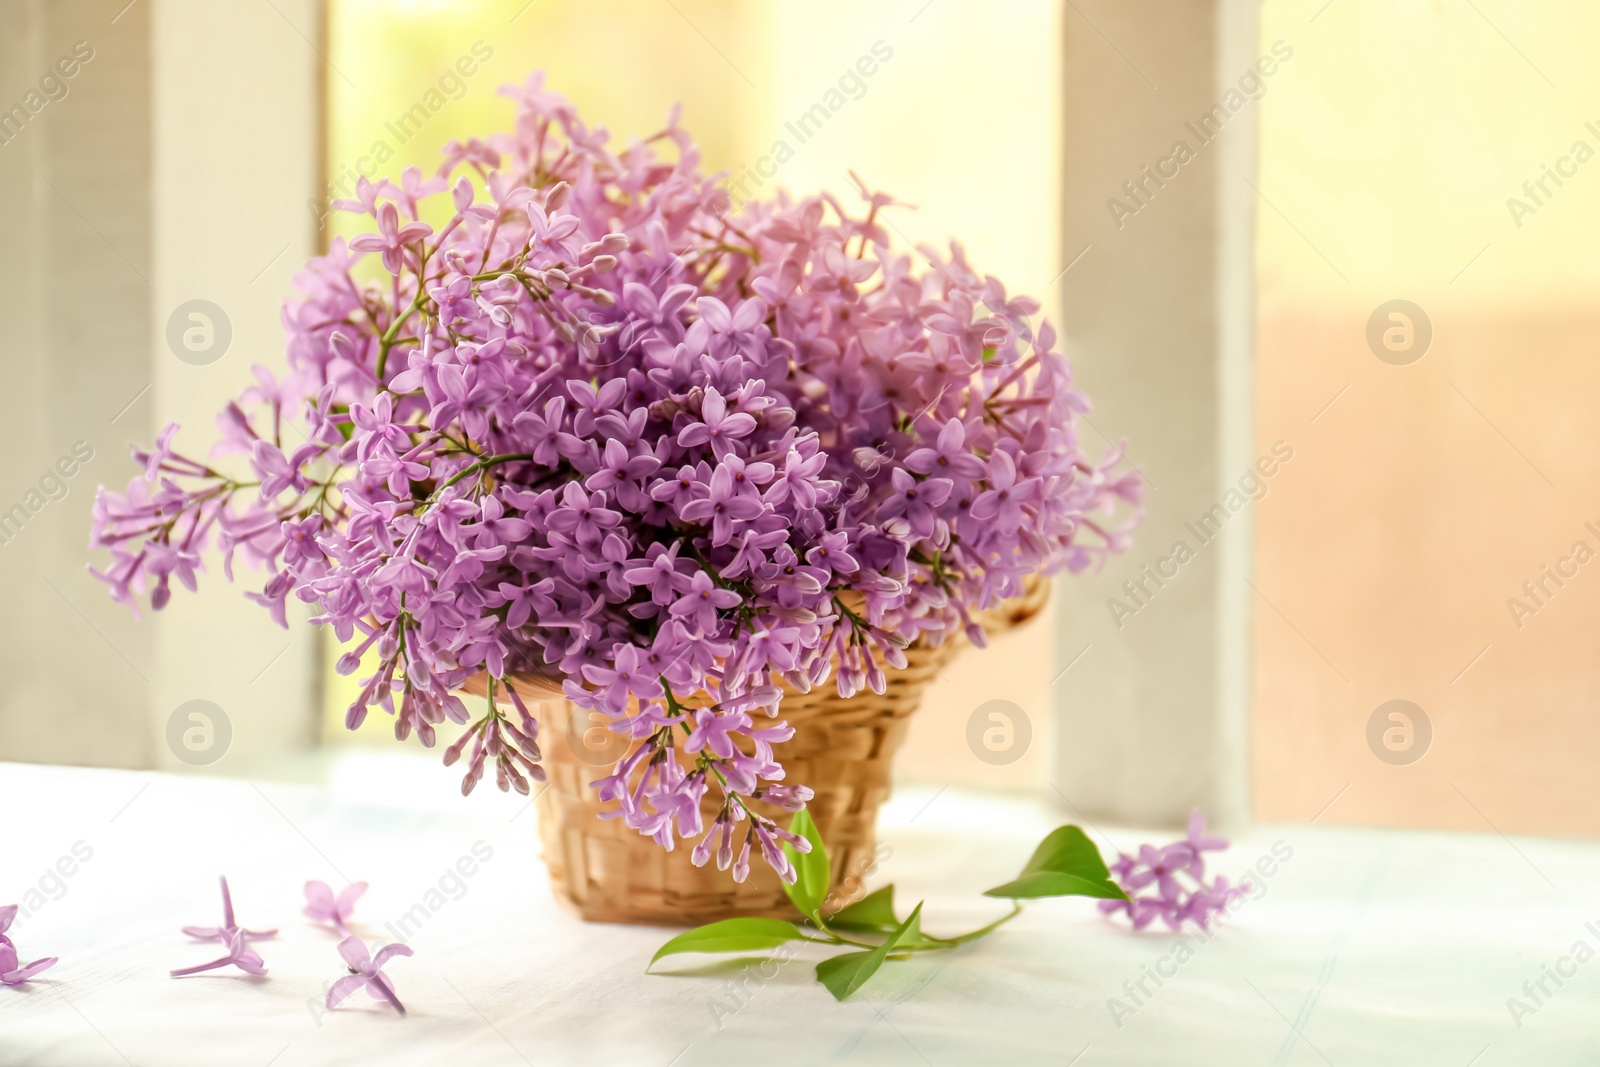 Photo of Beautiful lilac flowers in wicker basket on window sill indoors